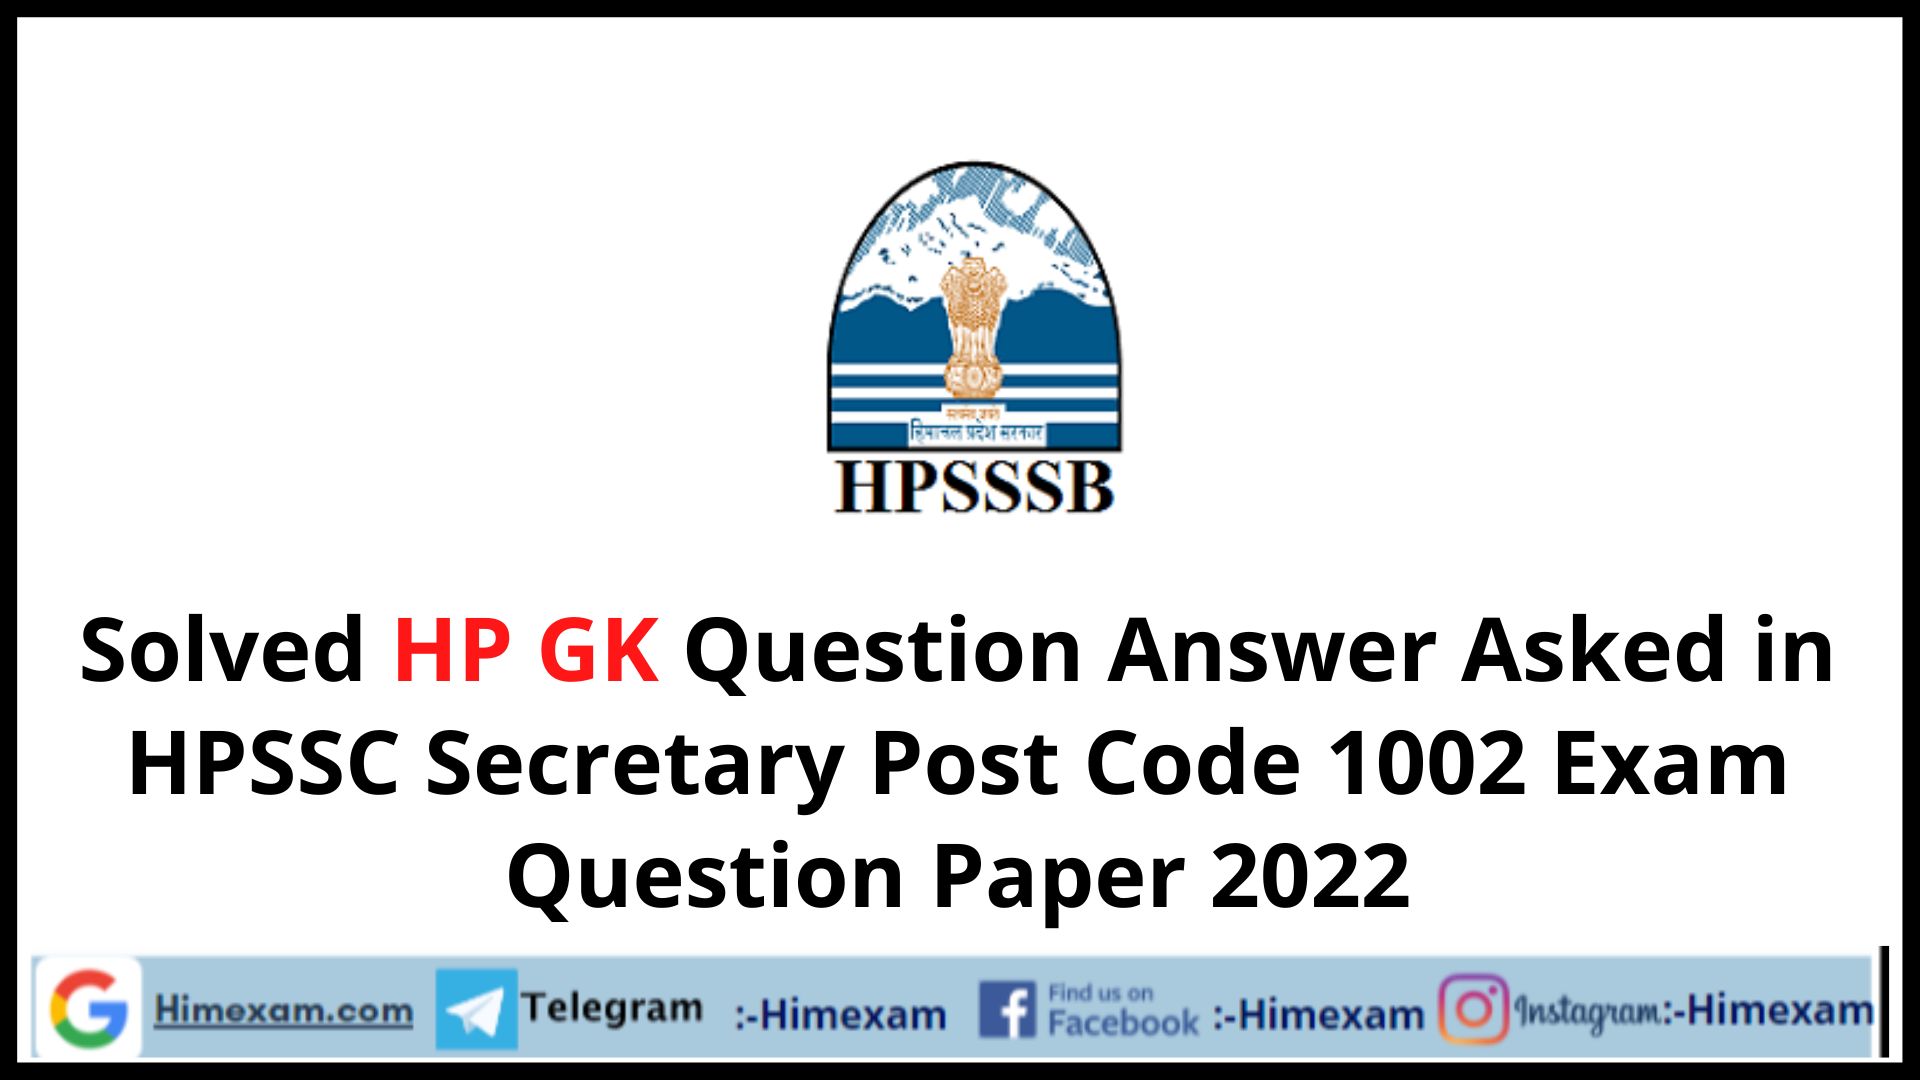 Solved HP GK Question Answer Asked in HPSSC  Secretary Post Code 1002 Exam Question Paper 2022